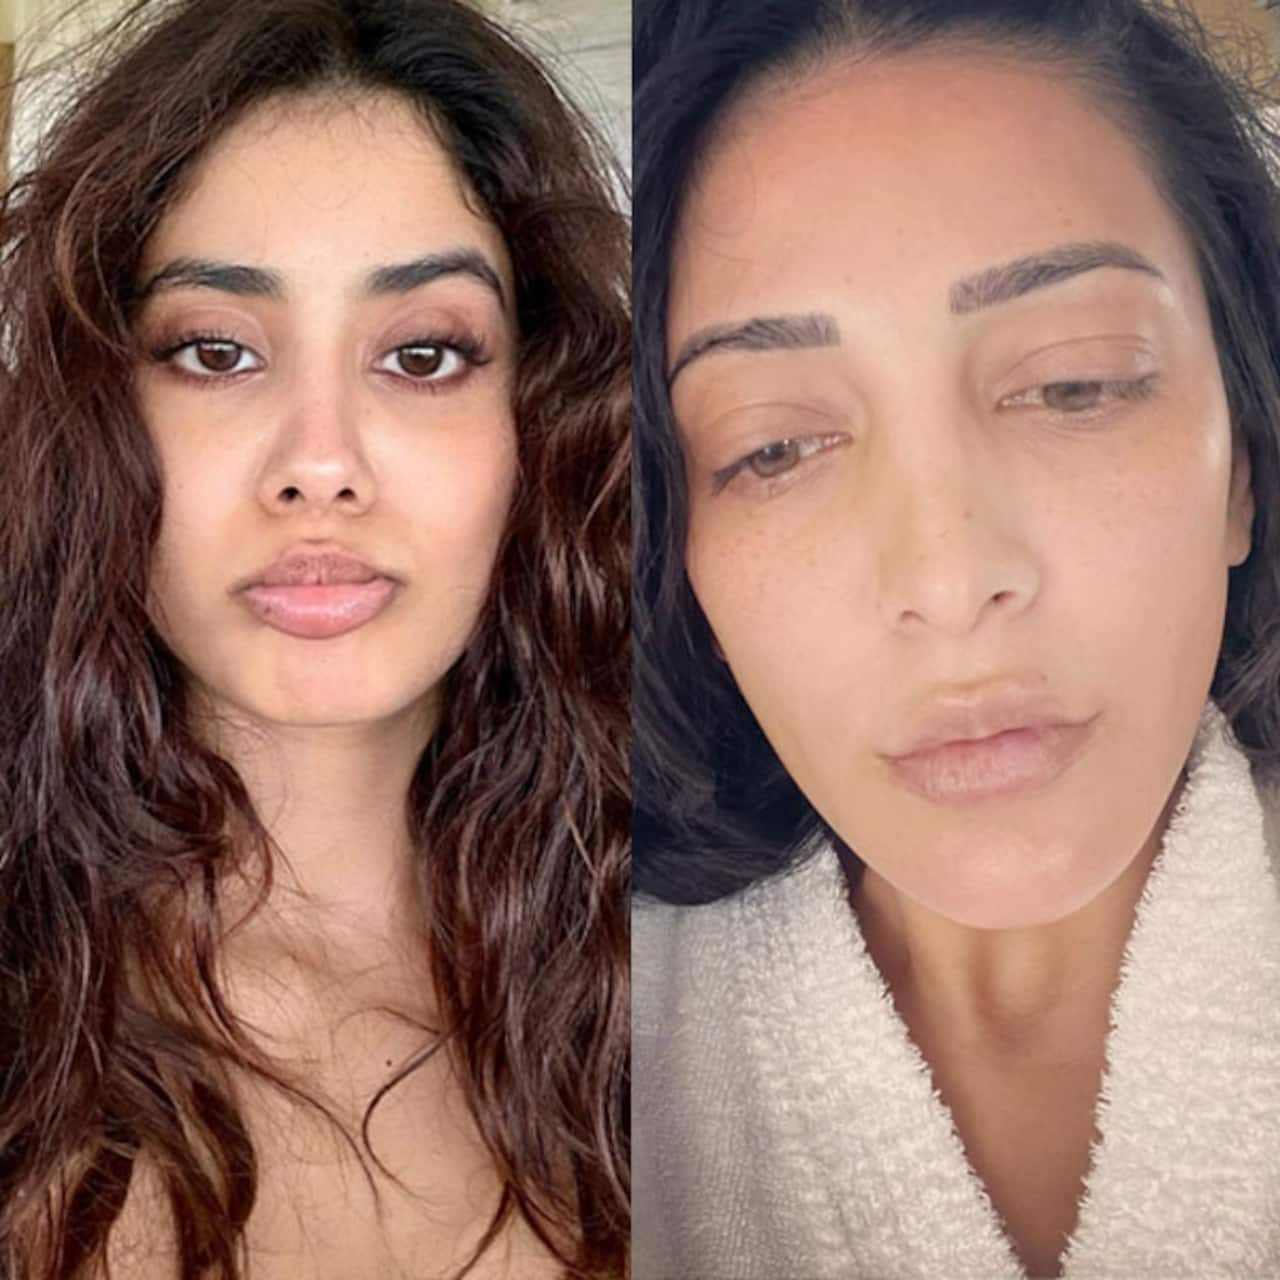 After Shruti Haasan, Janhvi Kapoor shares messy hair, no makeup look  pictures as she vacations in Maldives